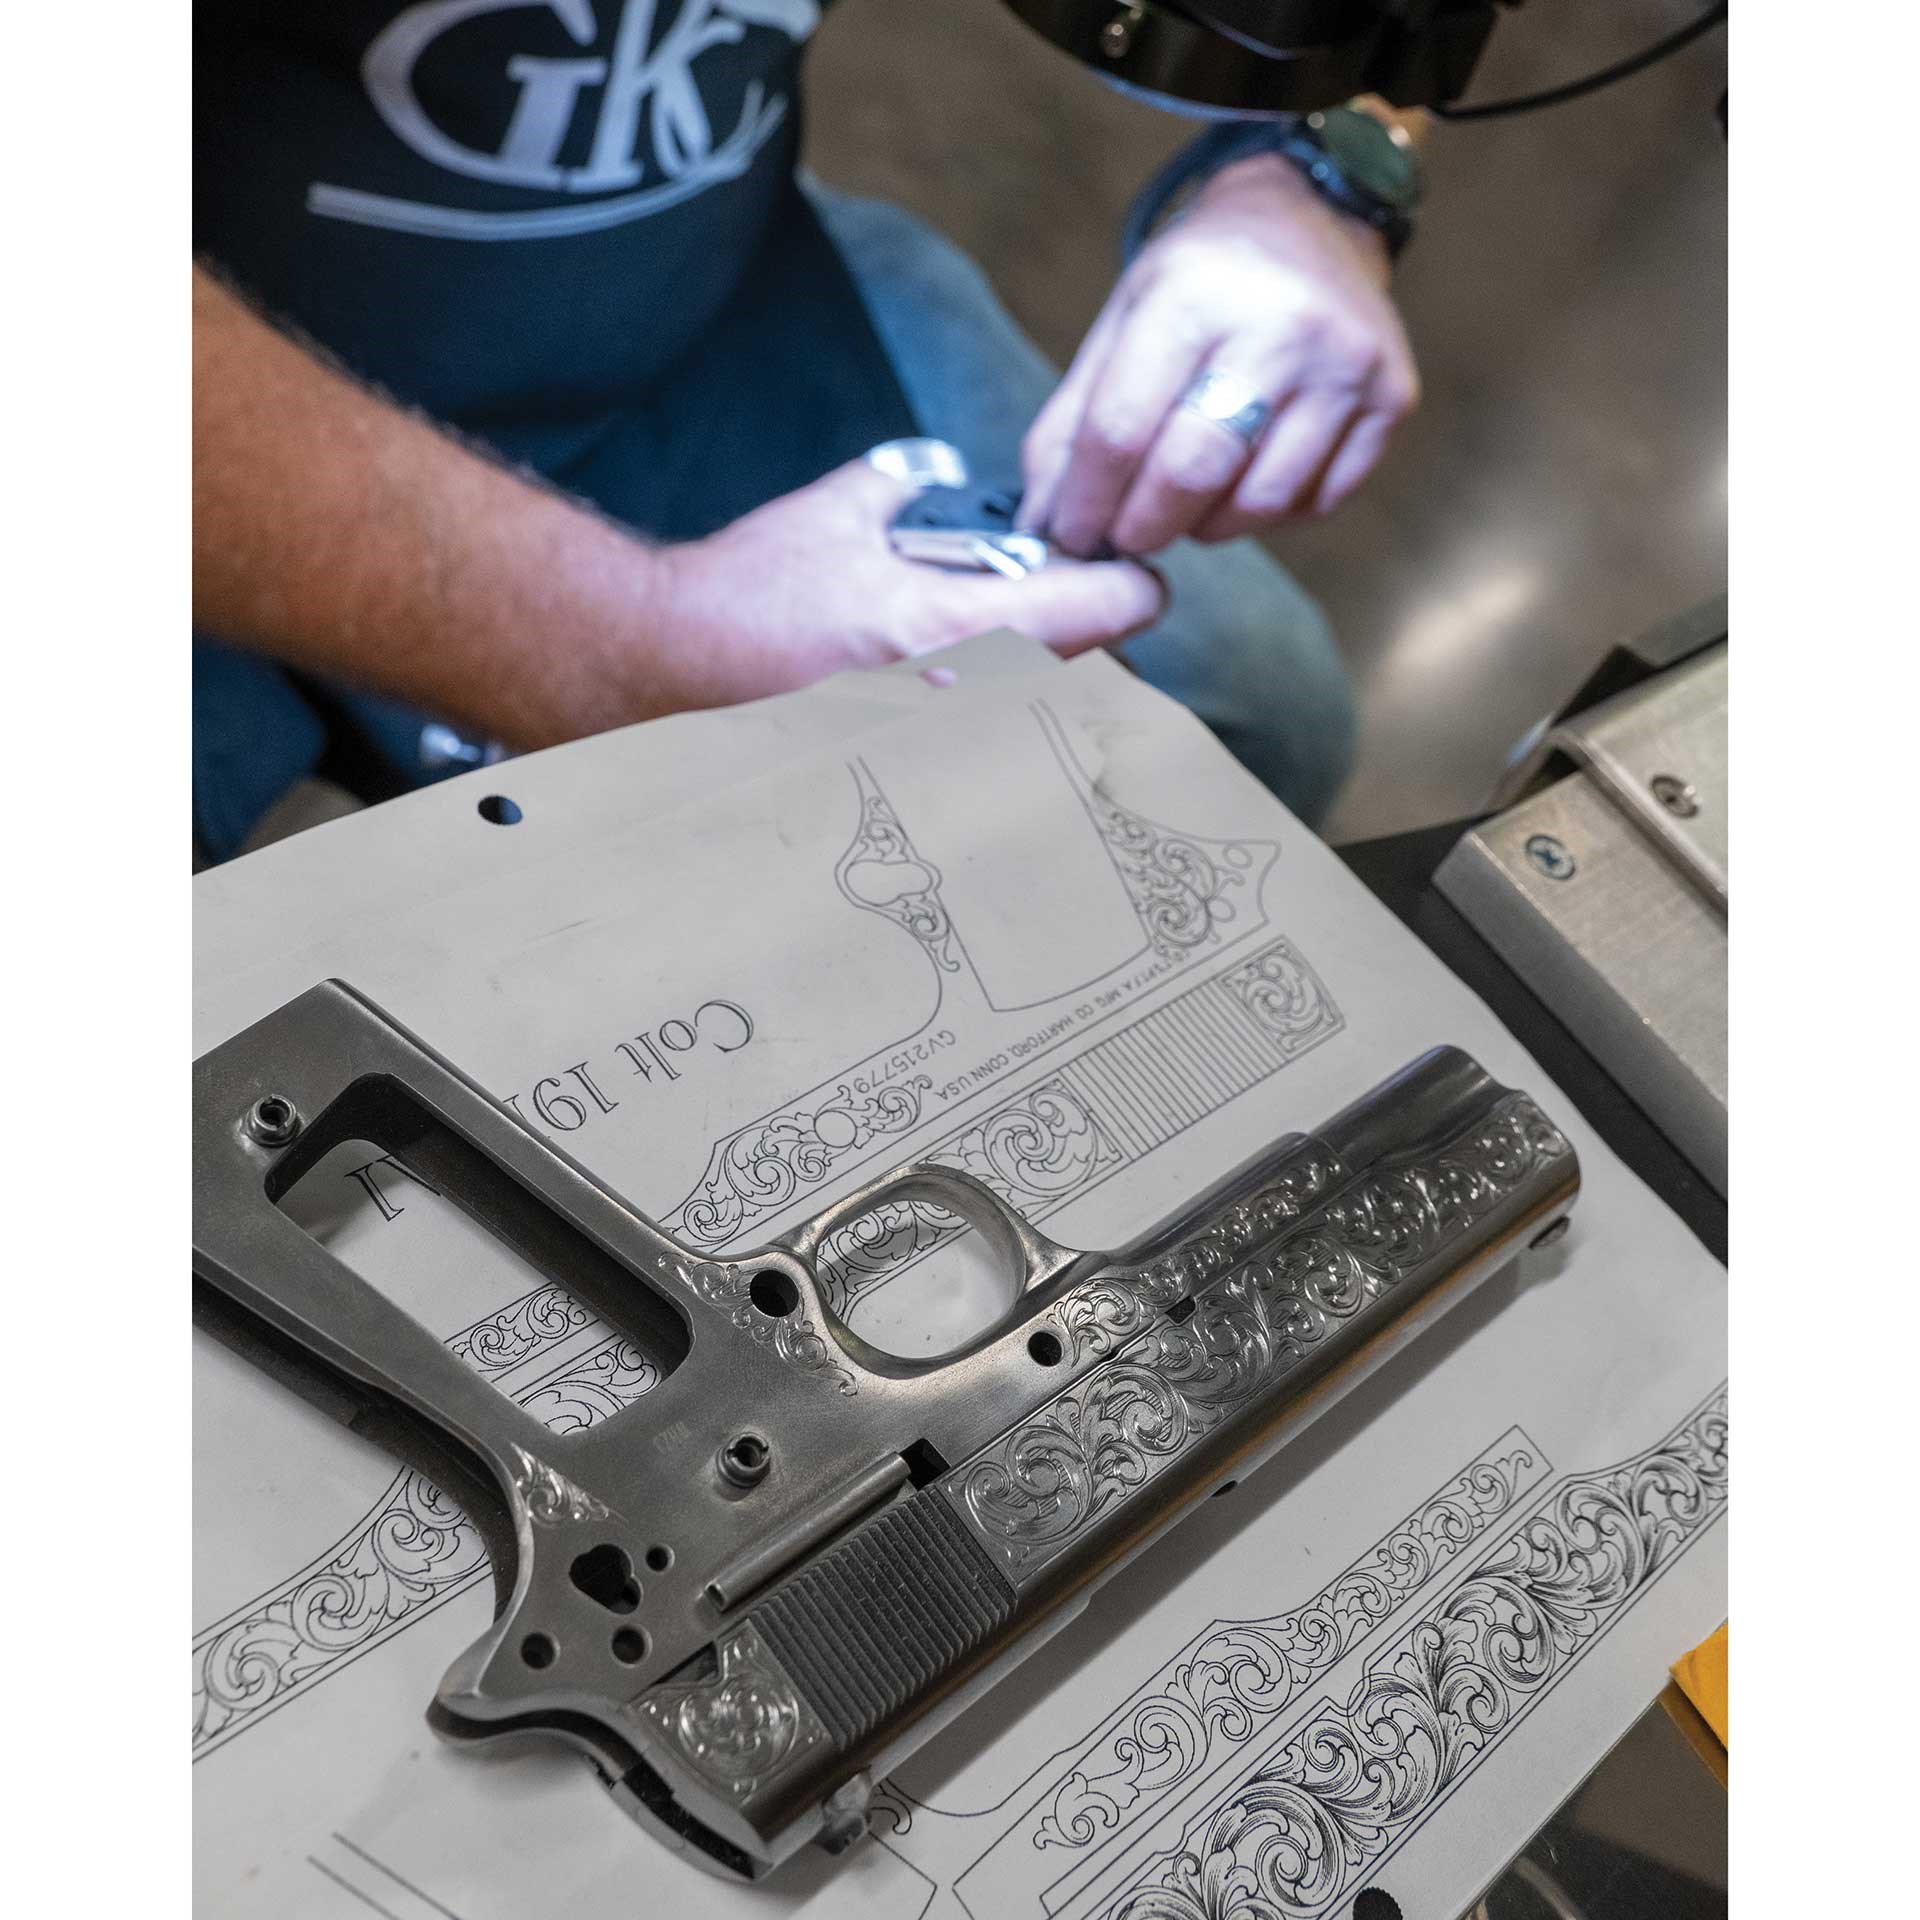 A man works to engrave a firearm while looking at a pattern in the foreground.